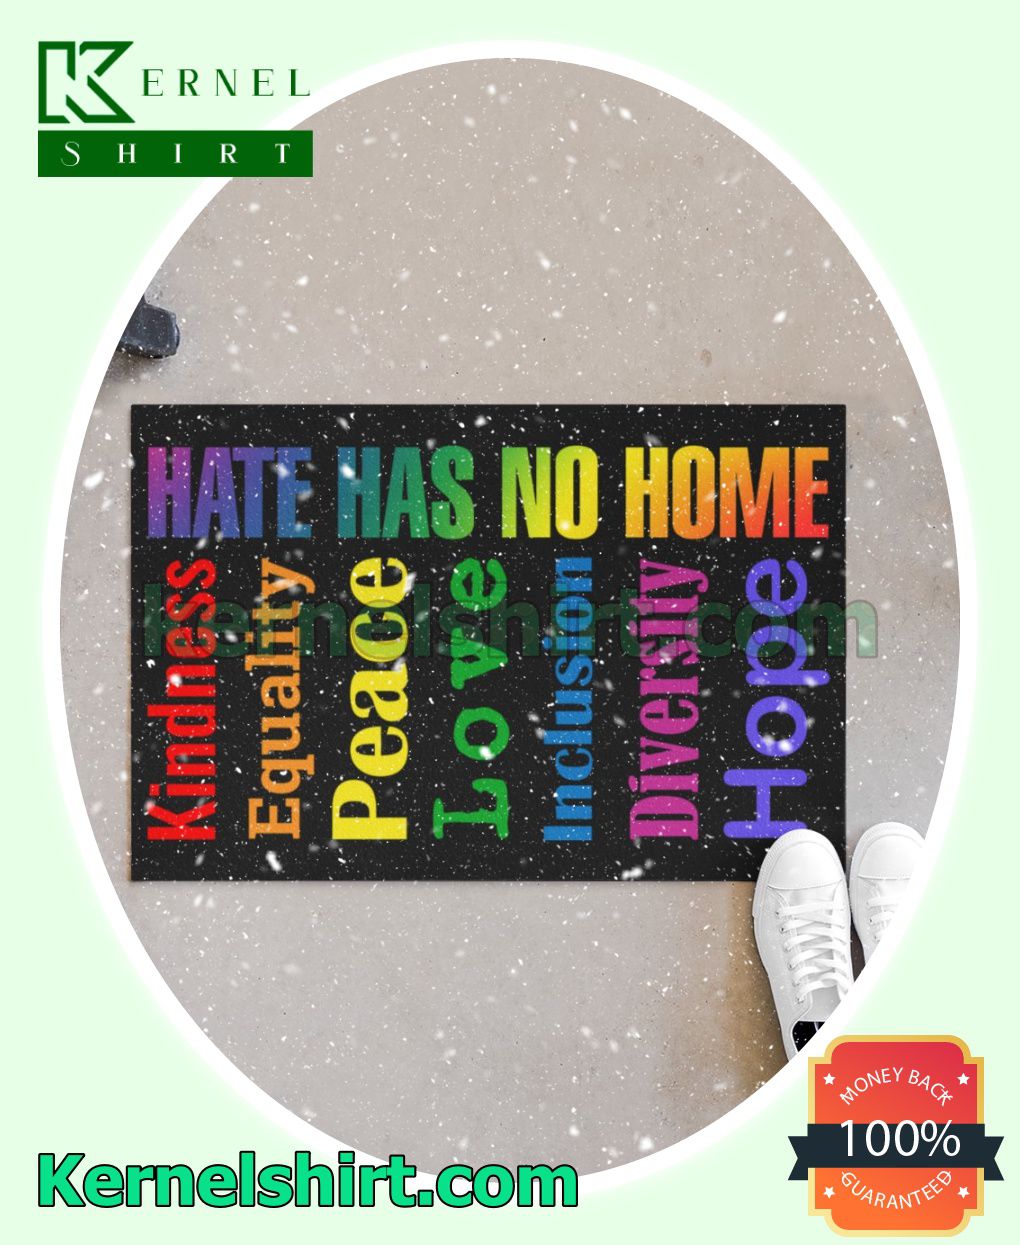 Hate Has No Home Kindness Equality Peace Love Inclusion Diversity Hope Indoor Outdoor Door Rug b